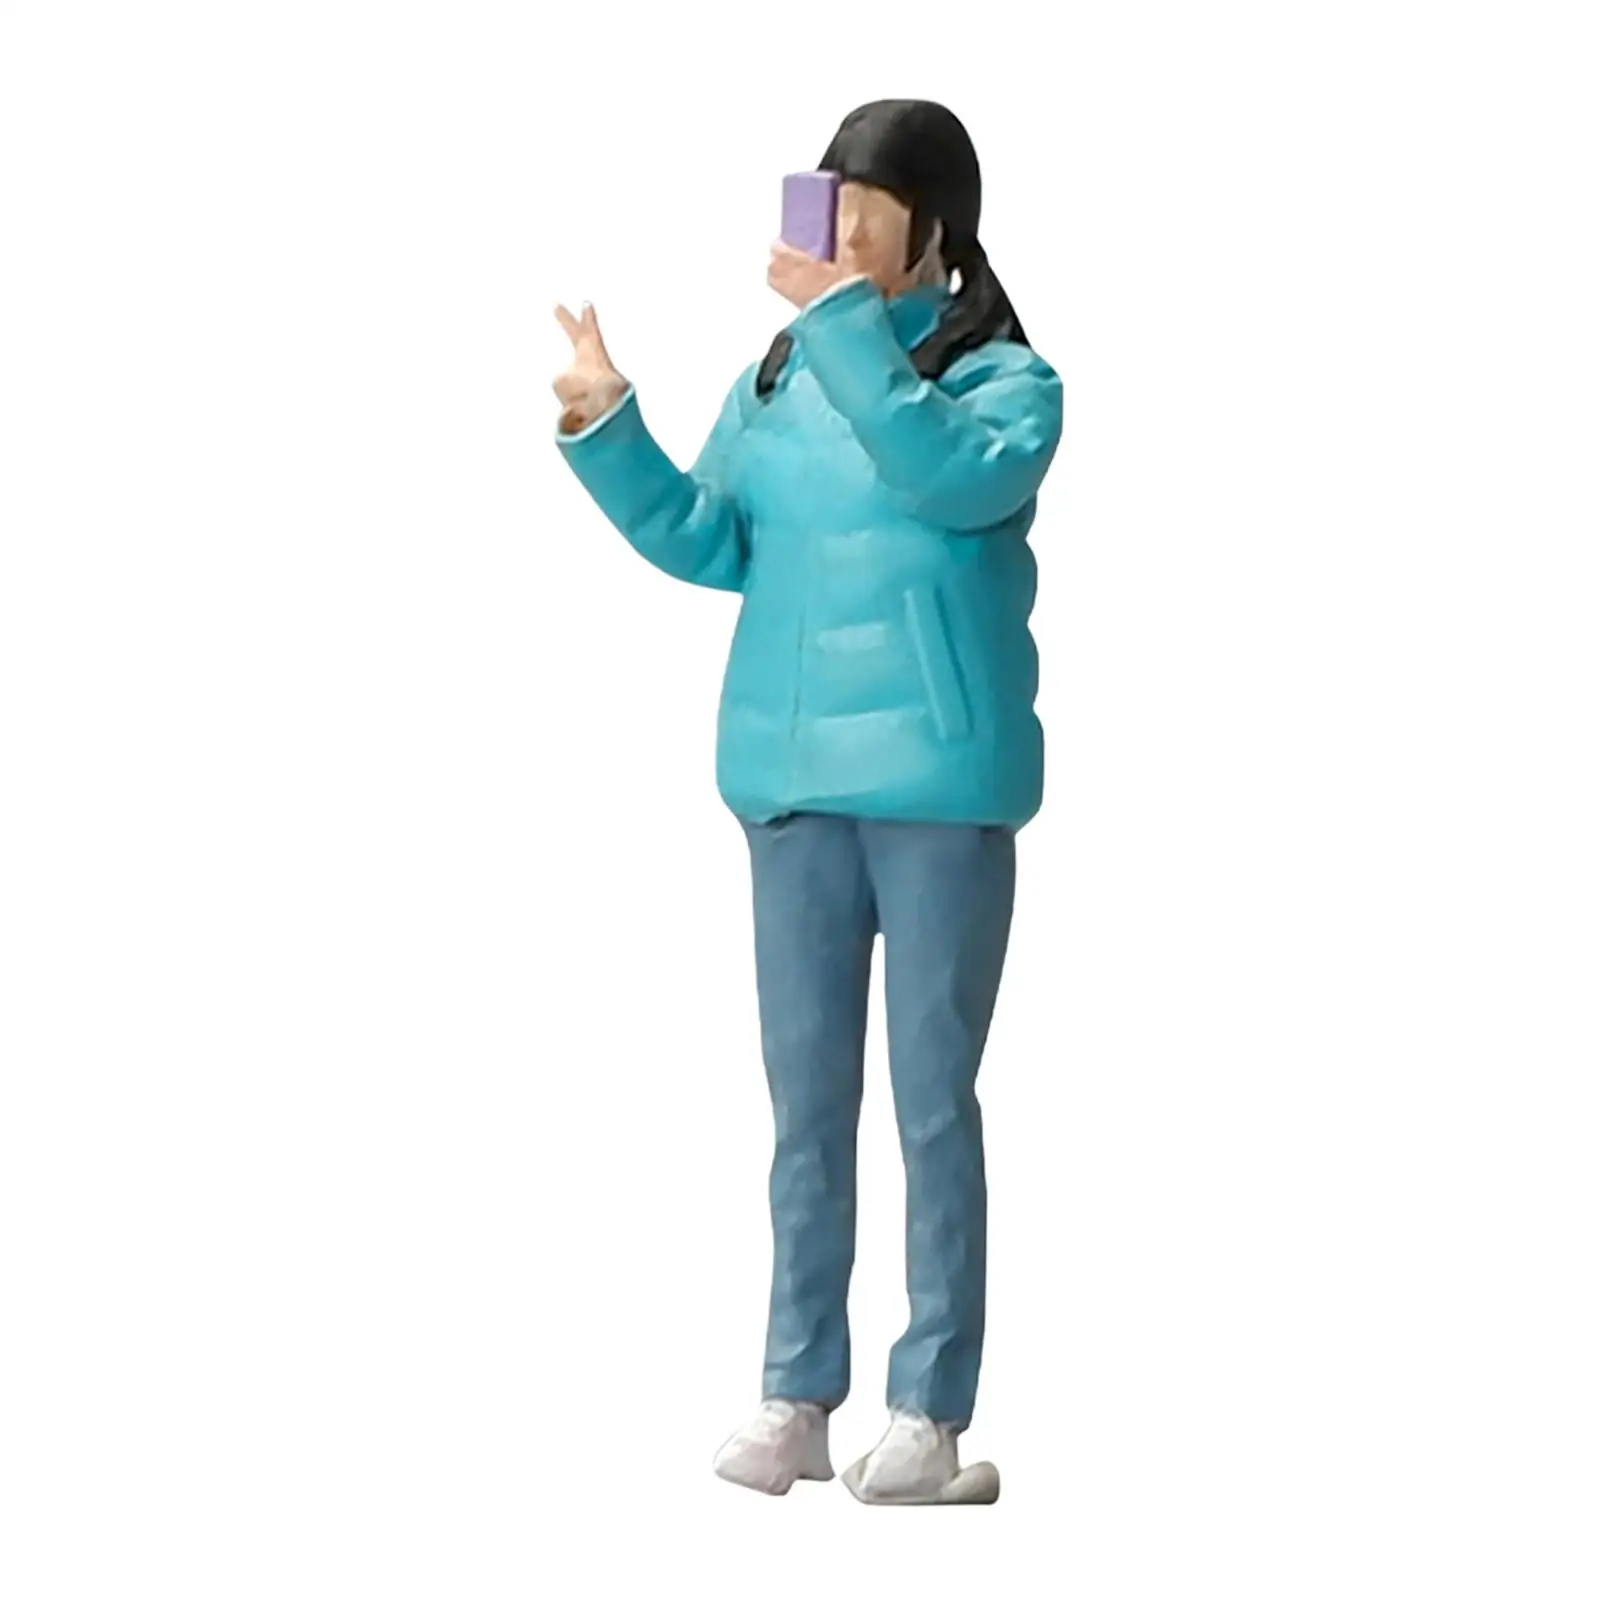 1:64 People Figures Down Jacket Girl Trains Architectural People Figures Tiny People Model for Miniature Scene Layout Decor